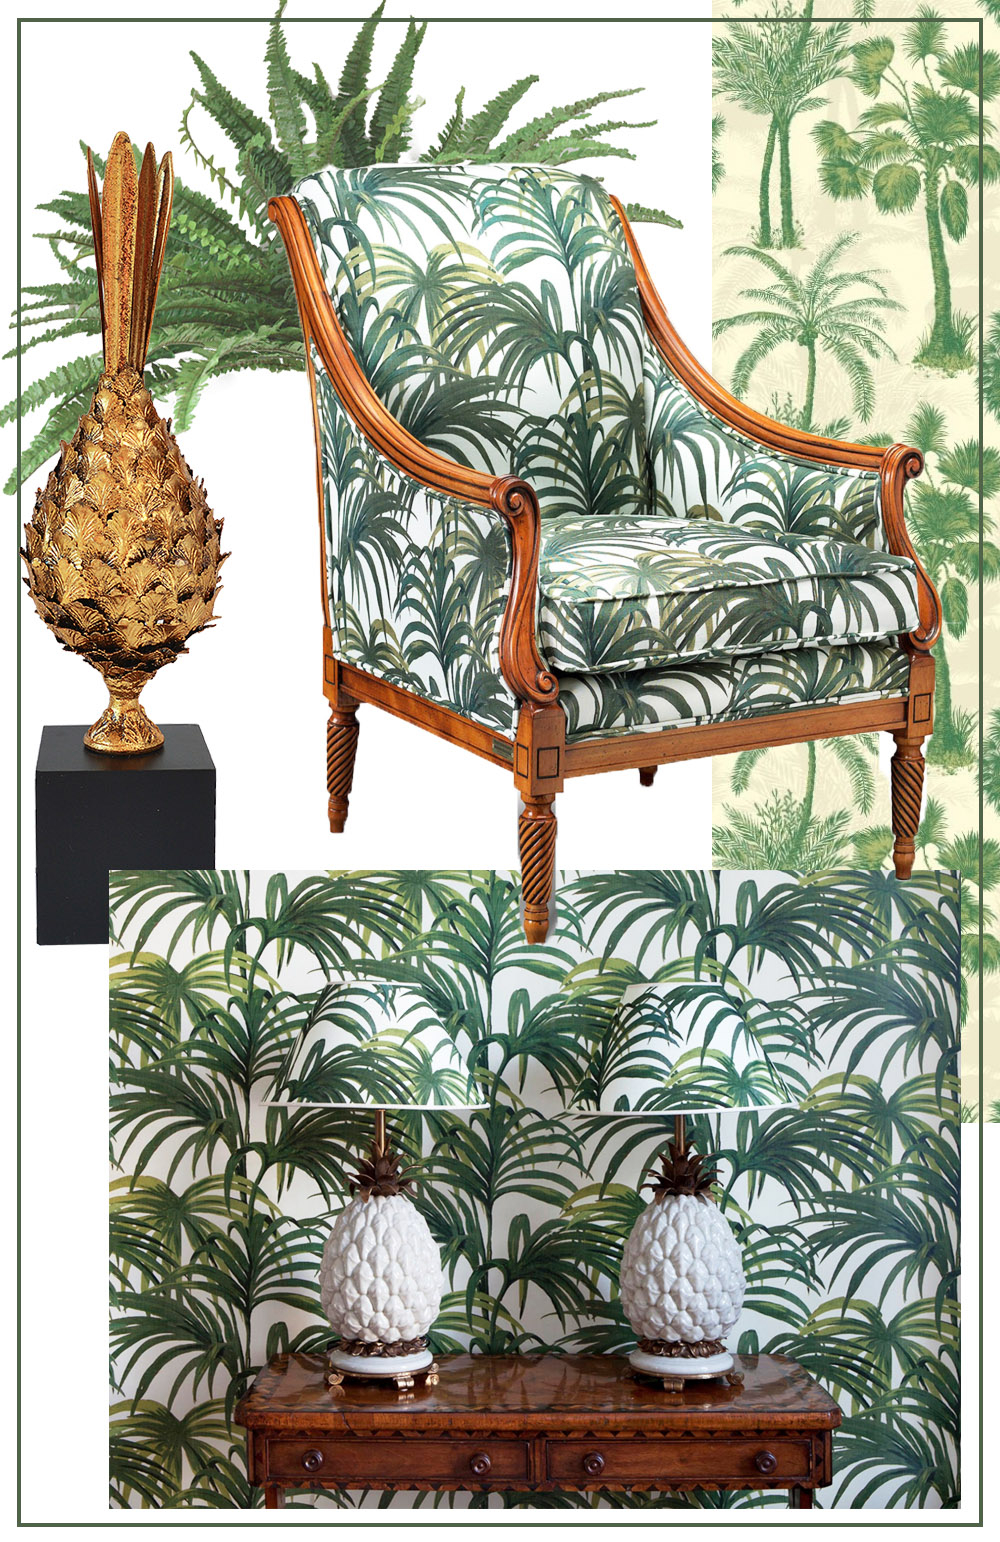 Tropical interiors is a key look for SS16. Think lush tropical greenery with colonial rattan- Audenza